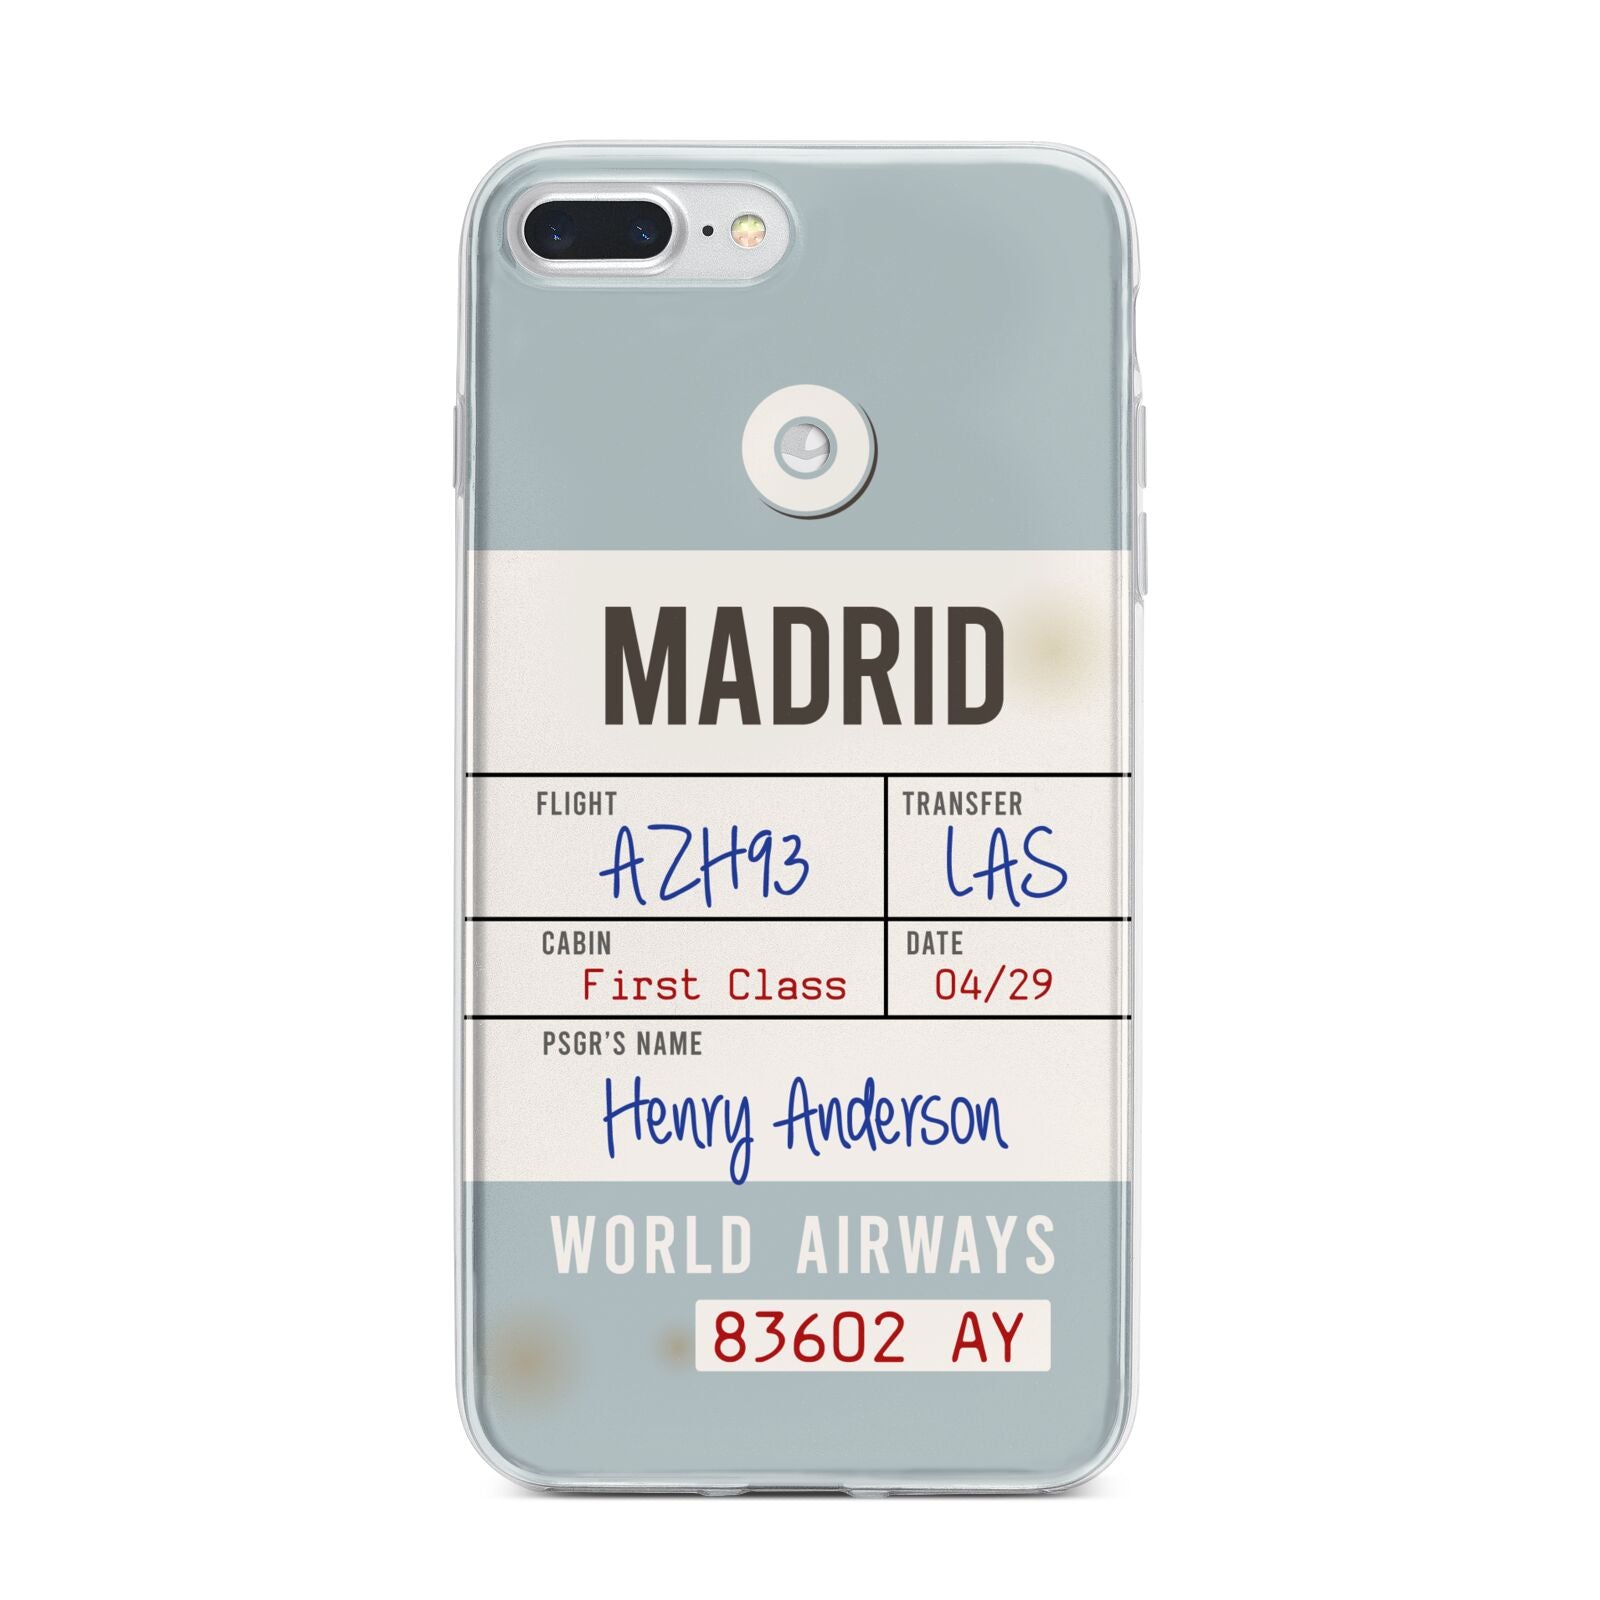 Baggage Tag iPhone 7 Plus Bumper Case on Silver iPhone